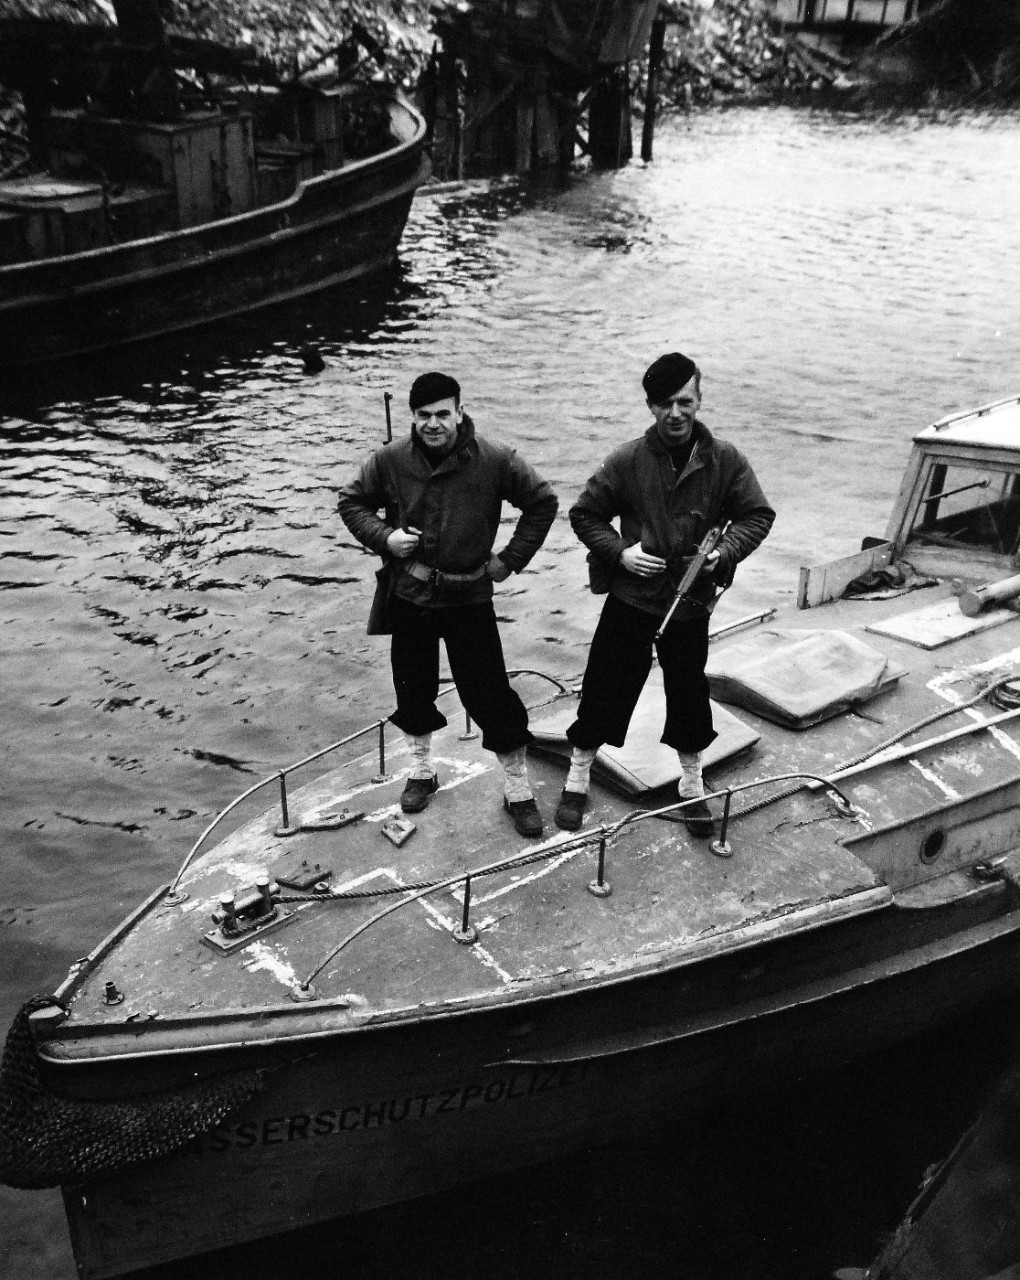 80-G-49282:   U.S. Navy in Germany, 1945.   Left to right:  SP(S)1/C J.E. Simmons and SP(S)2/C Edmond Norton stand guard over a former Nazi police boat in the harbor area of Bremen, Germany.   Photograph released May 29, 1945.  Official U.S. Navy photograph, now in the collections of the U.S. Navy.   (2014/12/02).   